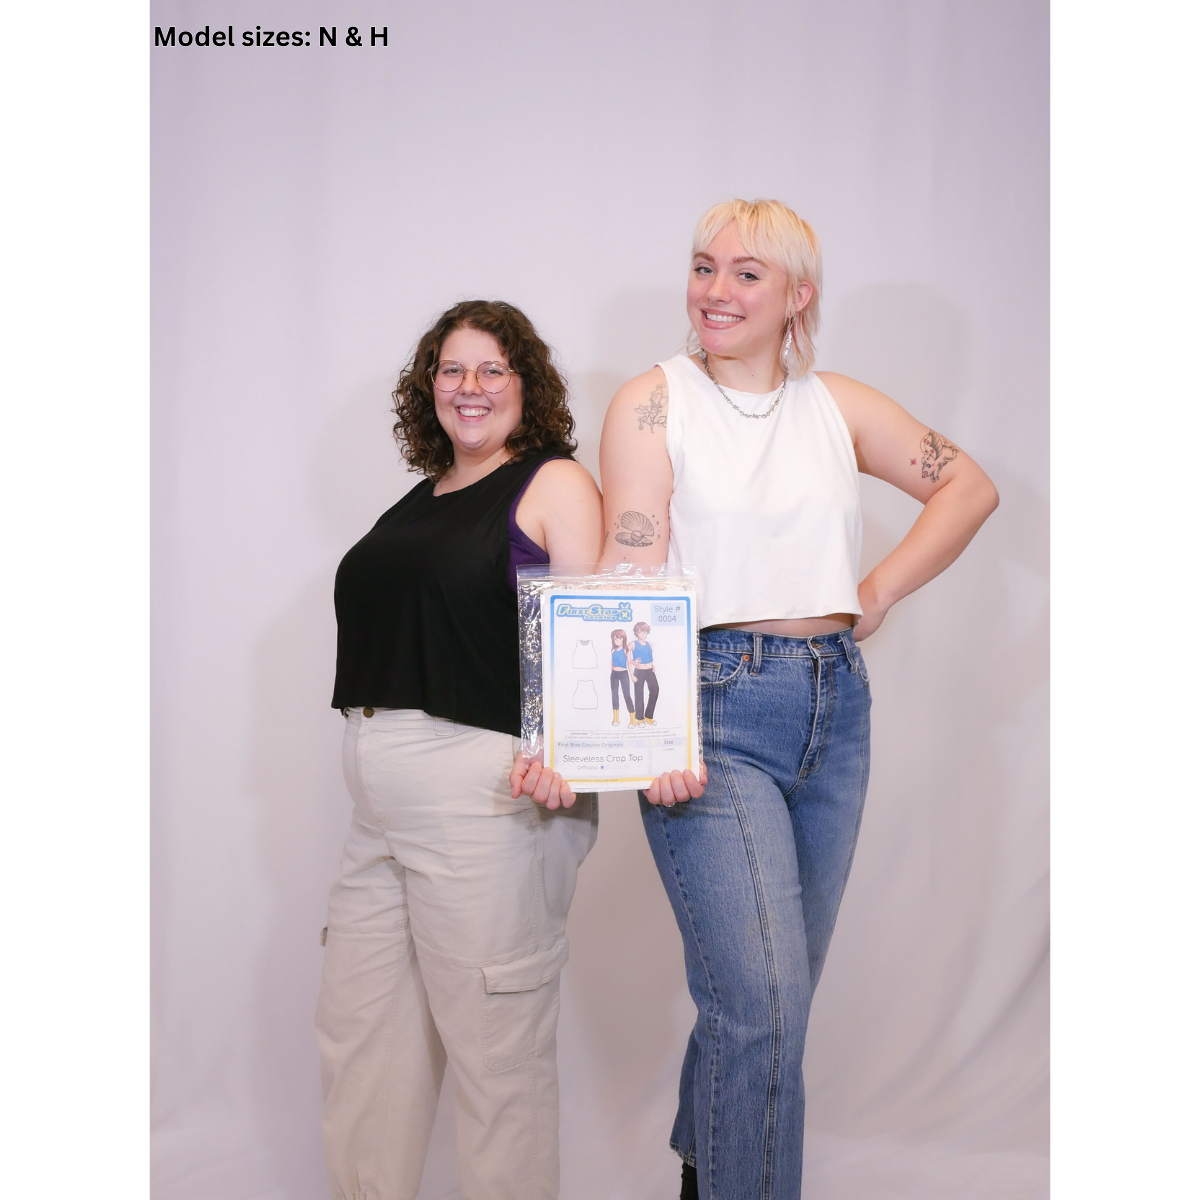 A photo of 2 people holding the packaging. One wearing a black sleeveless crop top (Size N) with beige pants, and the other wearing a sleeveless crop top (size H) with jeans.